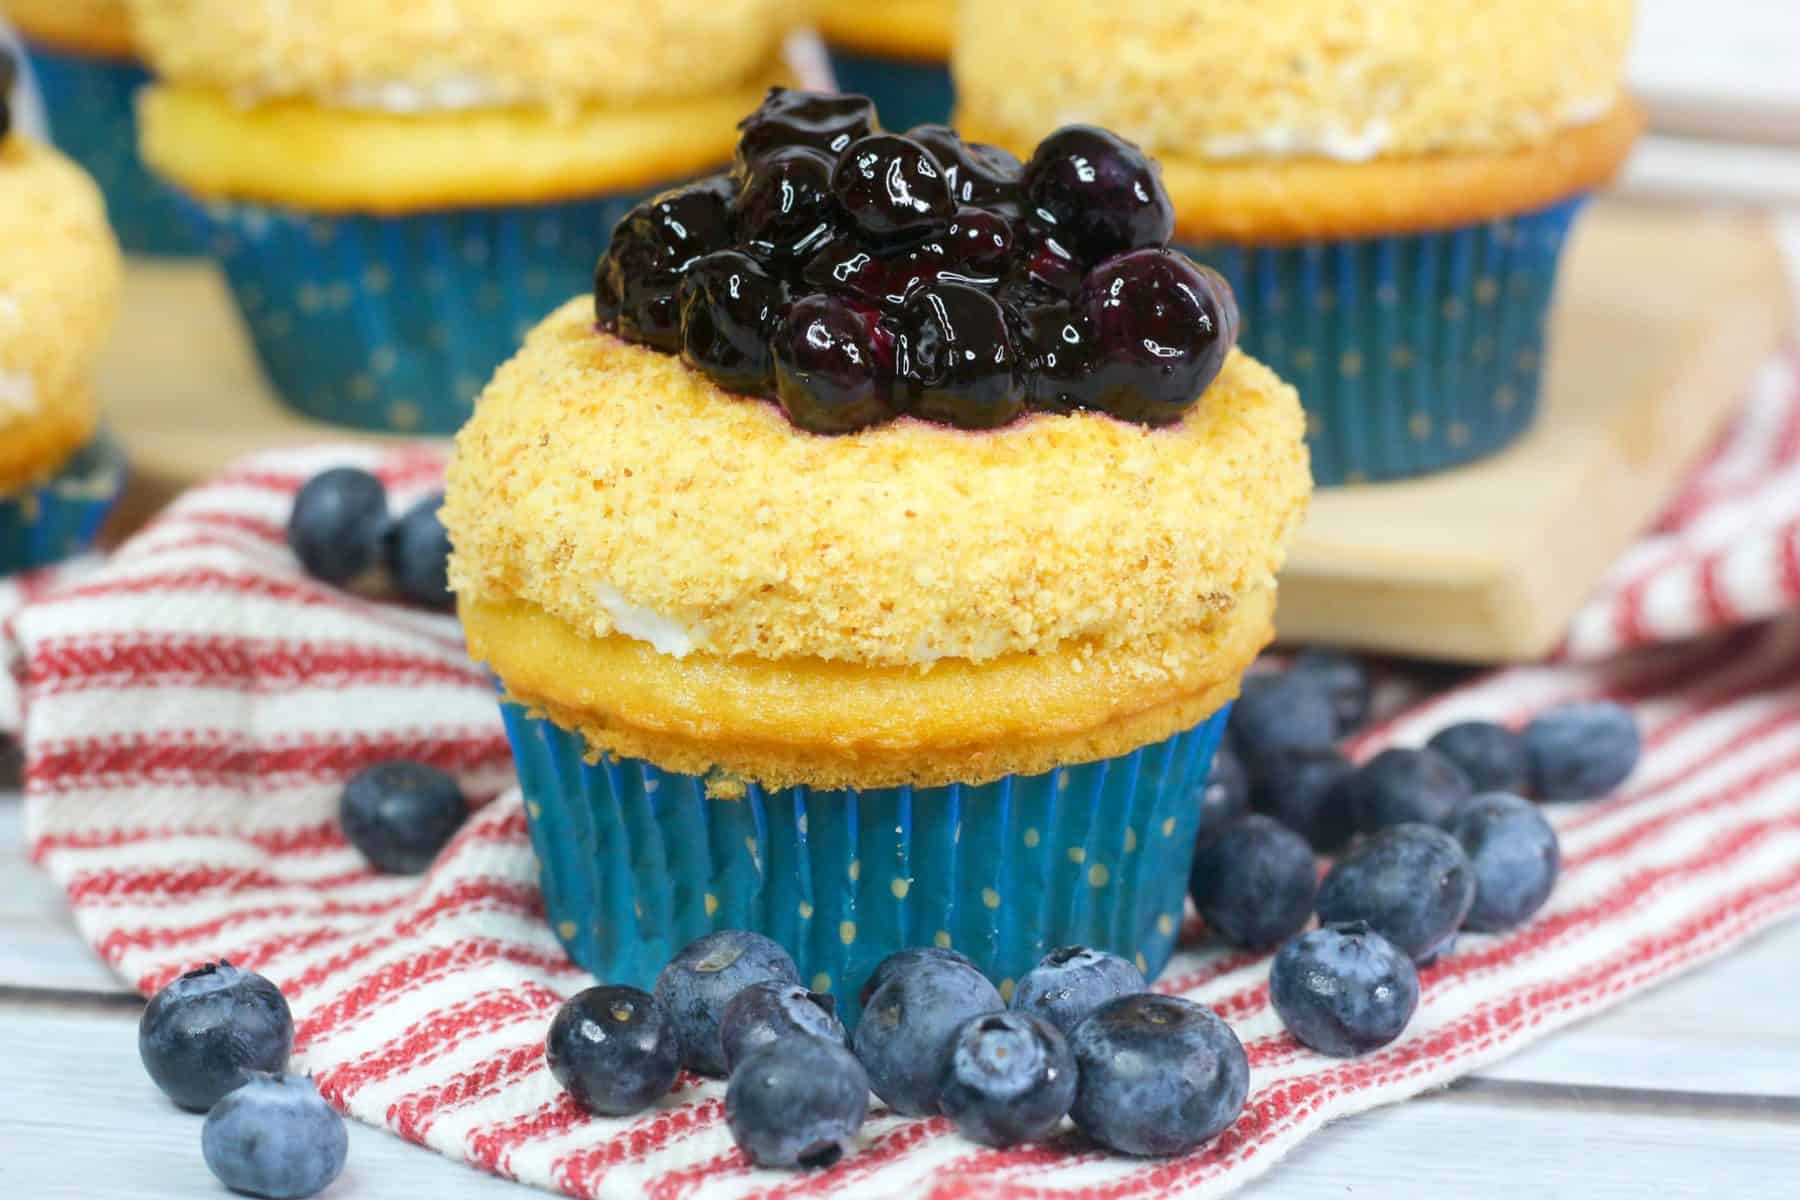 boxed cake mix cupcakes, blueberry filling cupcakes